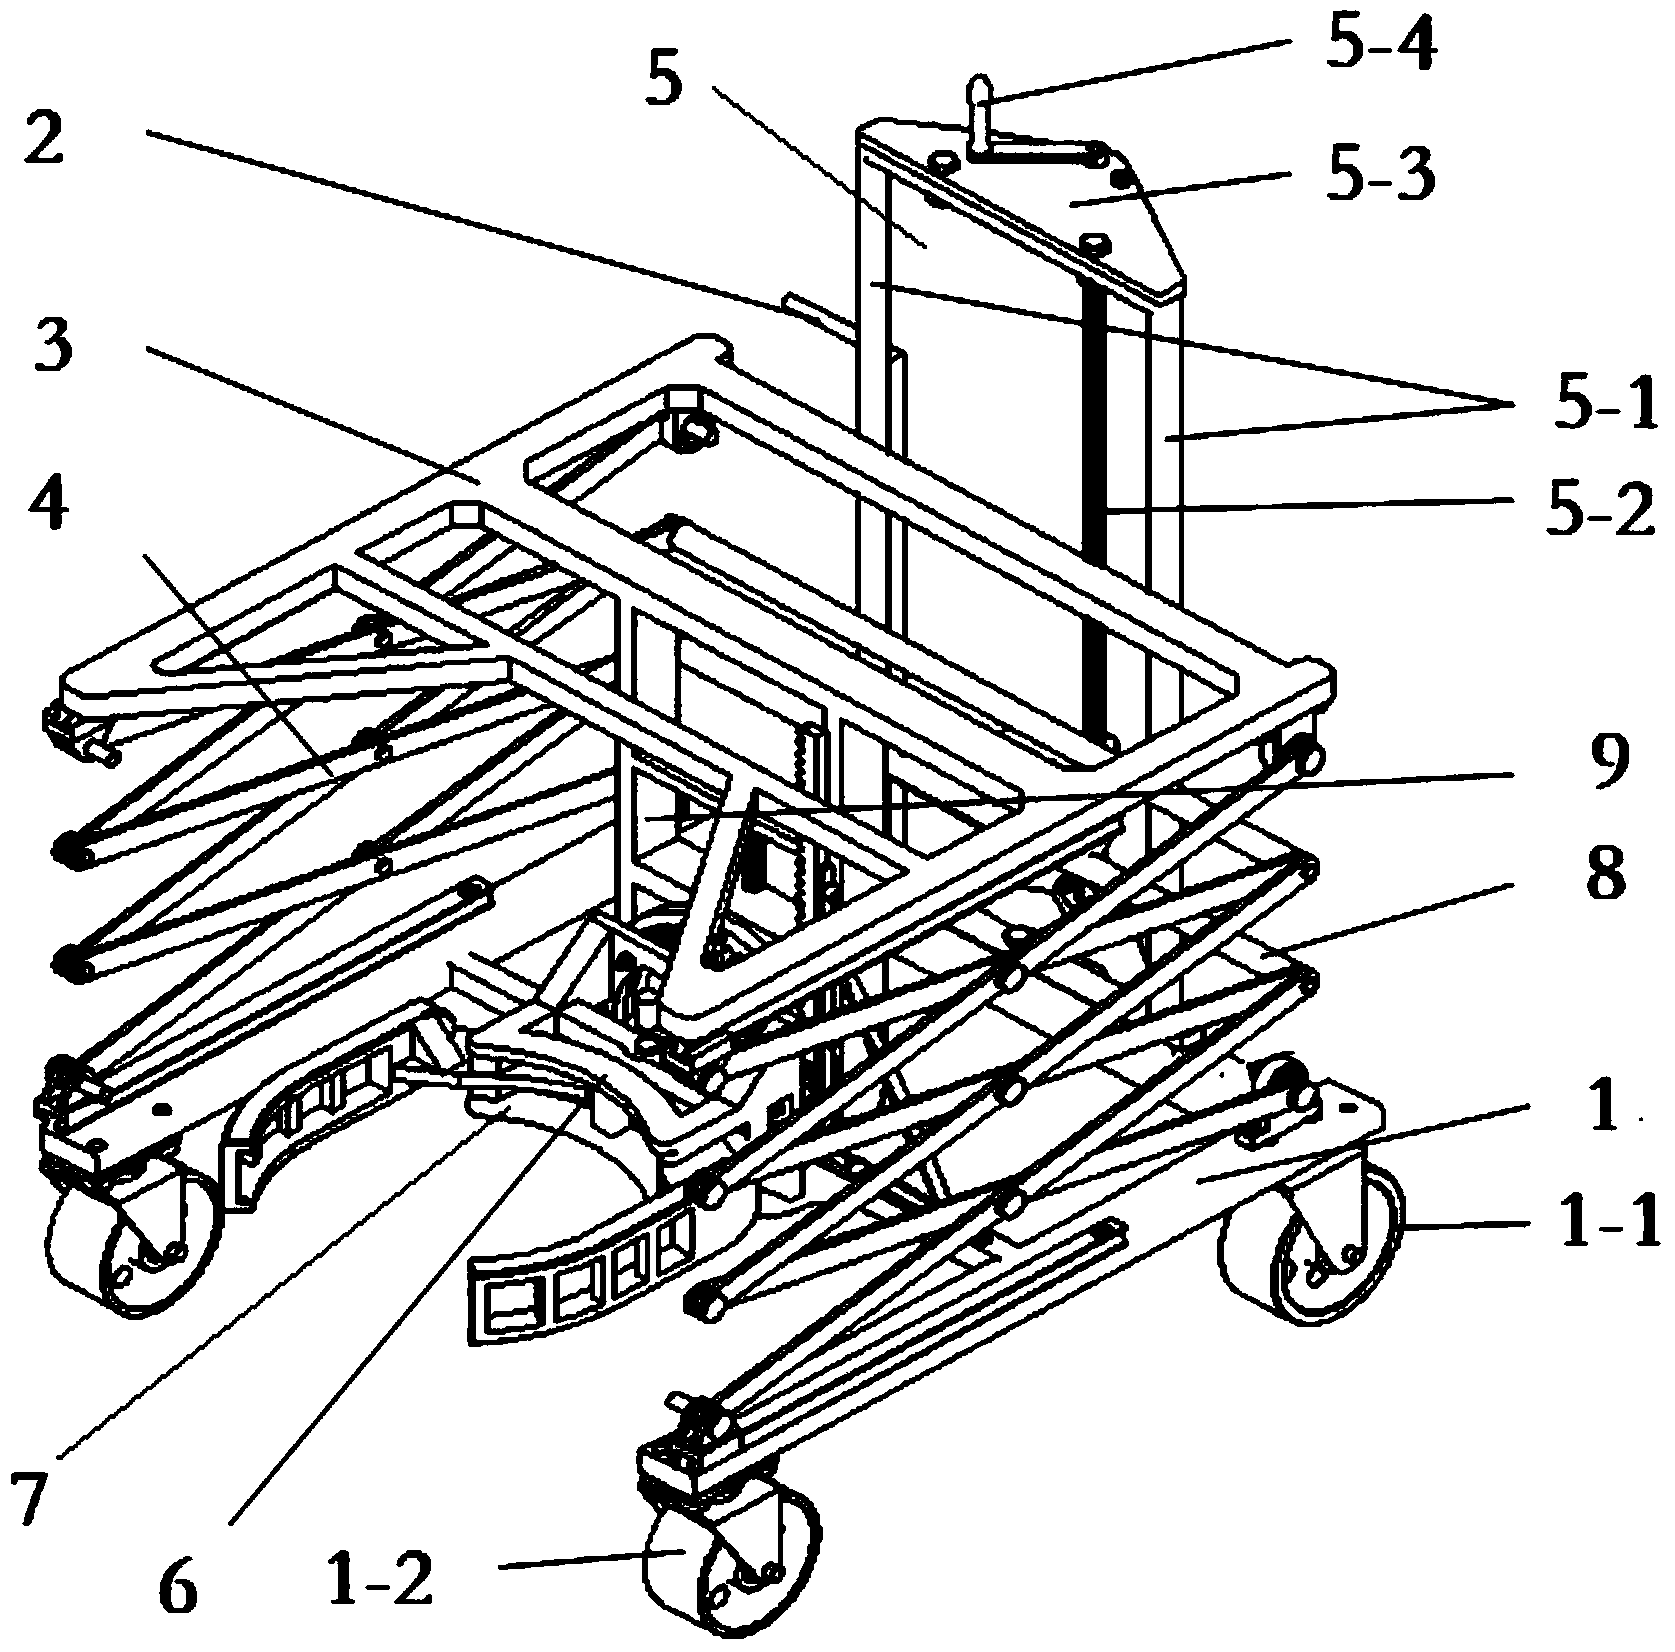 Semi-automatic loading device of barrelled water